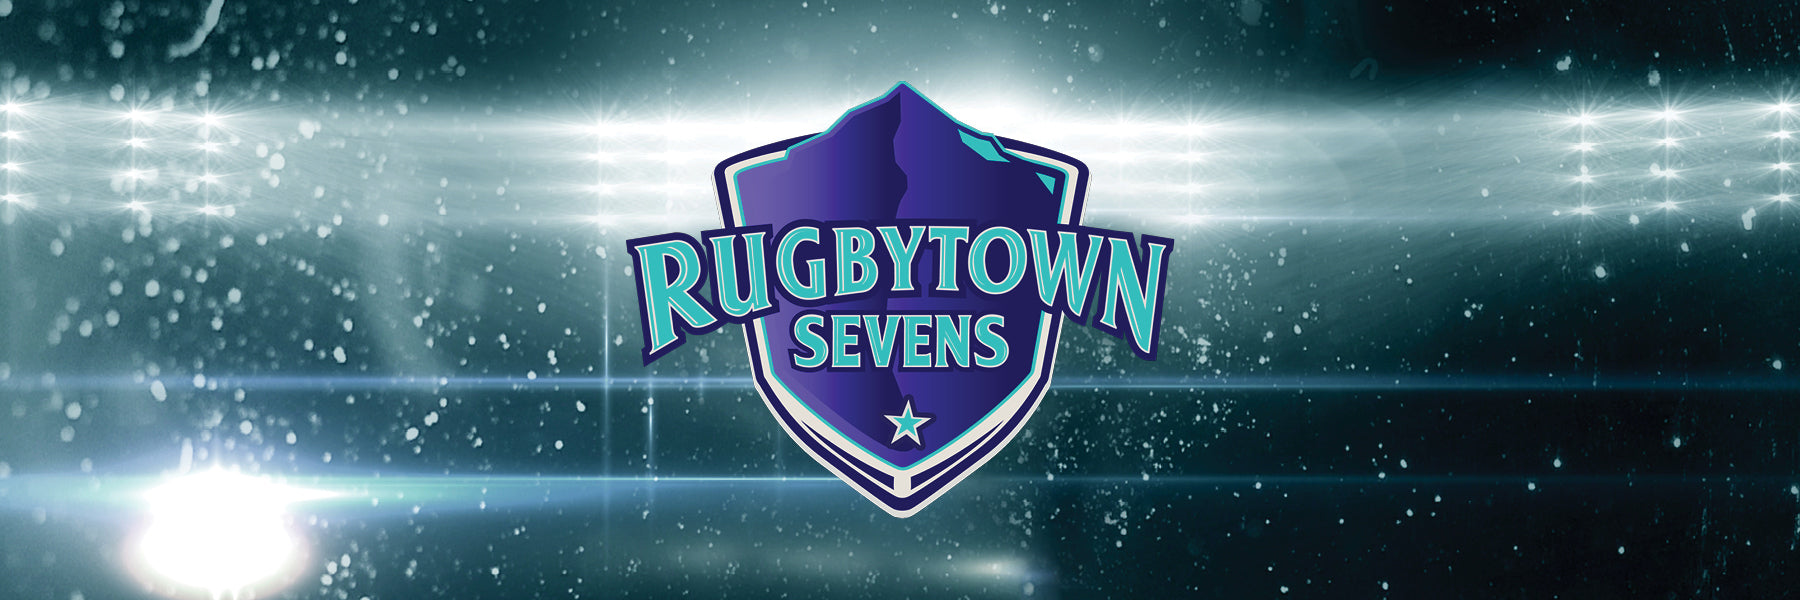 RugbyTown 7s Celebrates 10 years in 2022